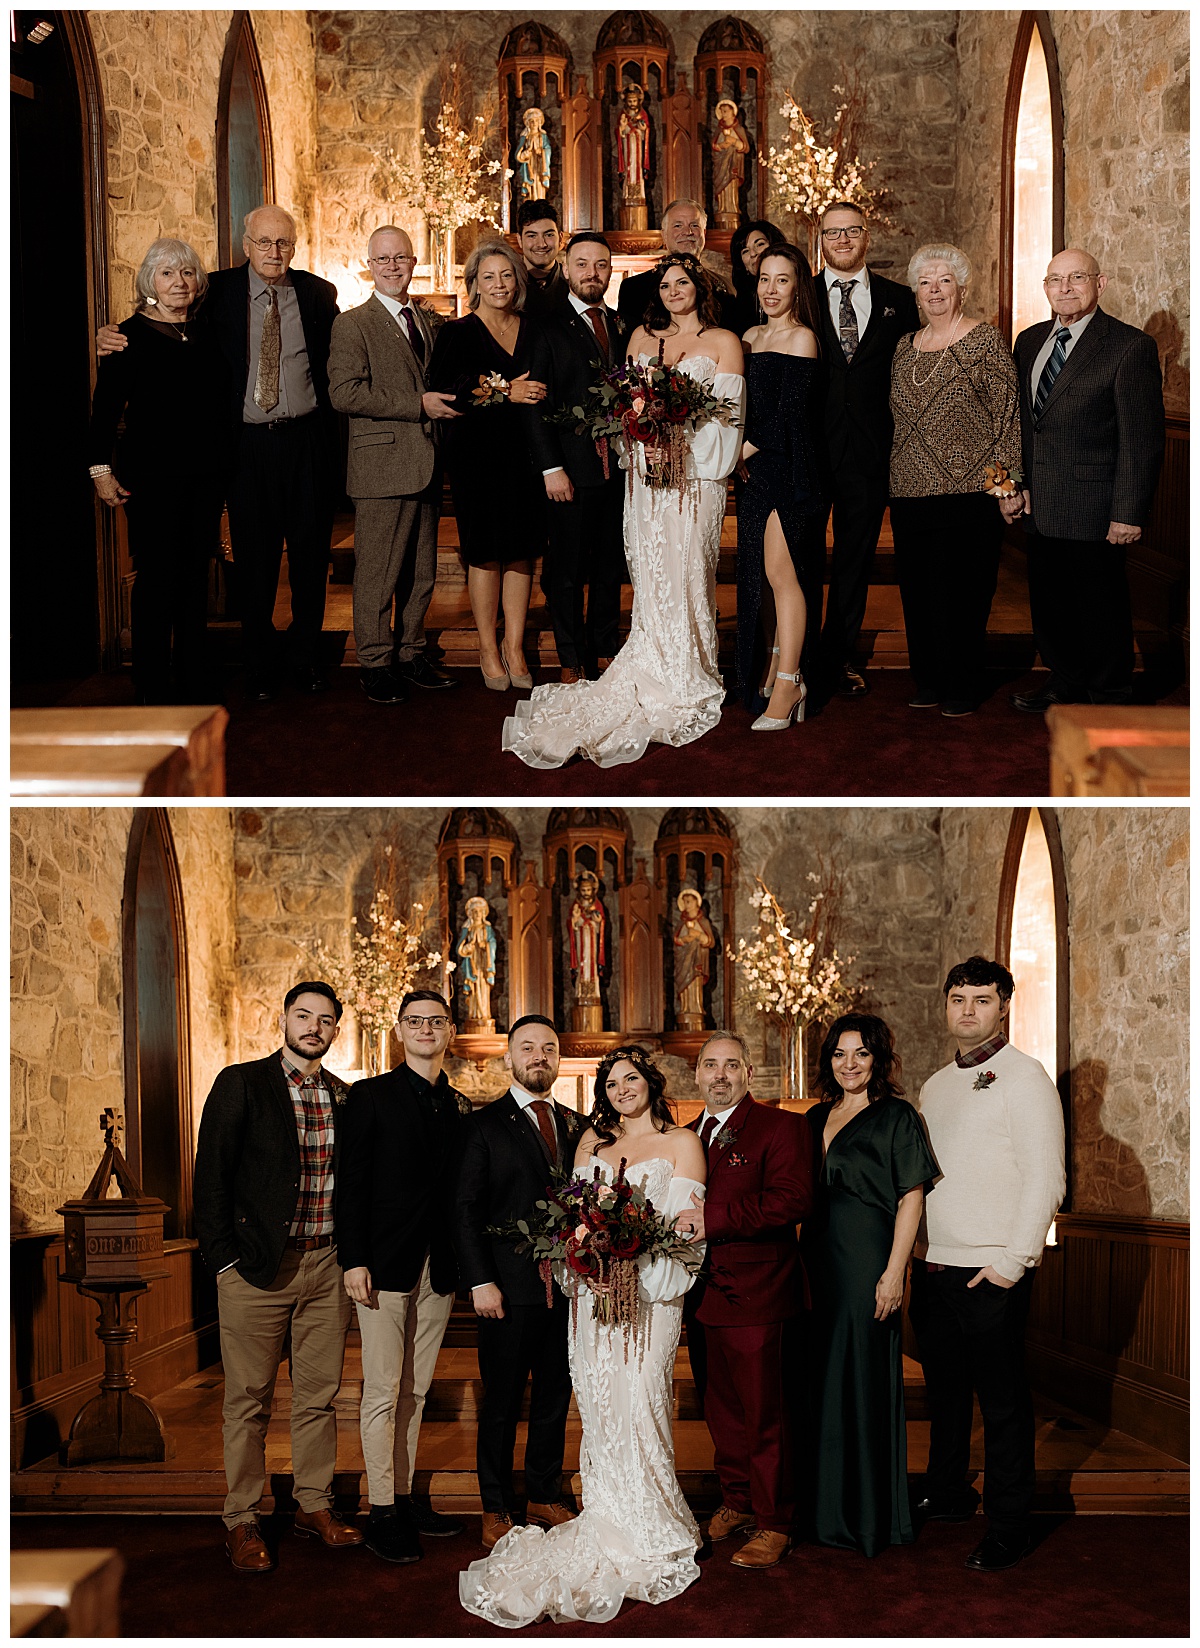 family gathers around bride and groom by New York elopement photographer